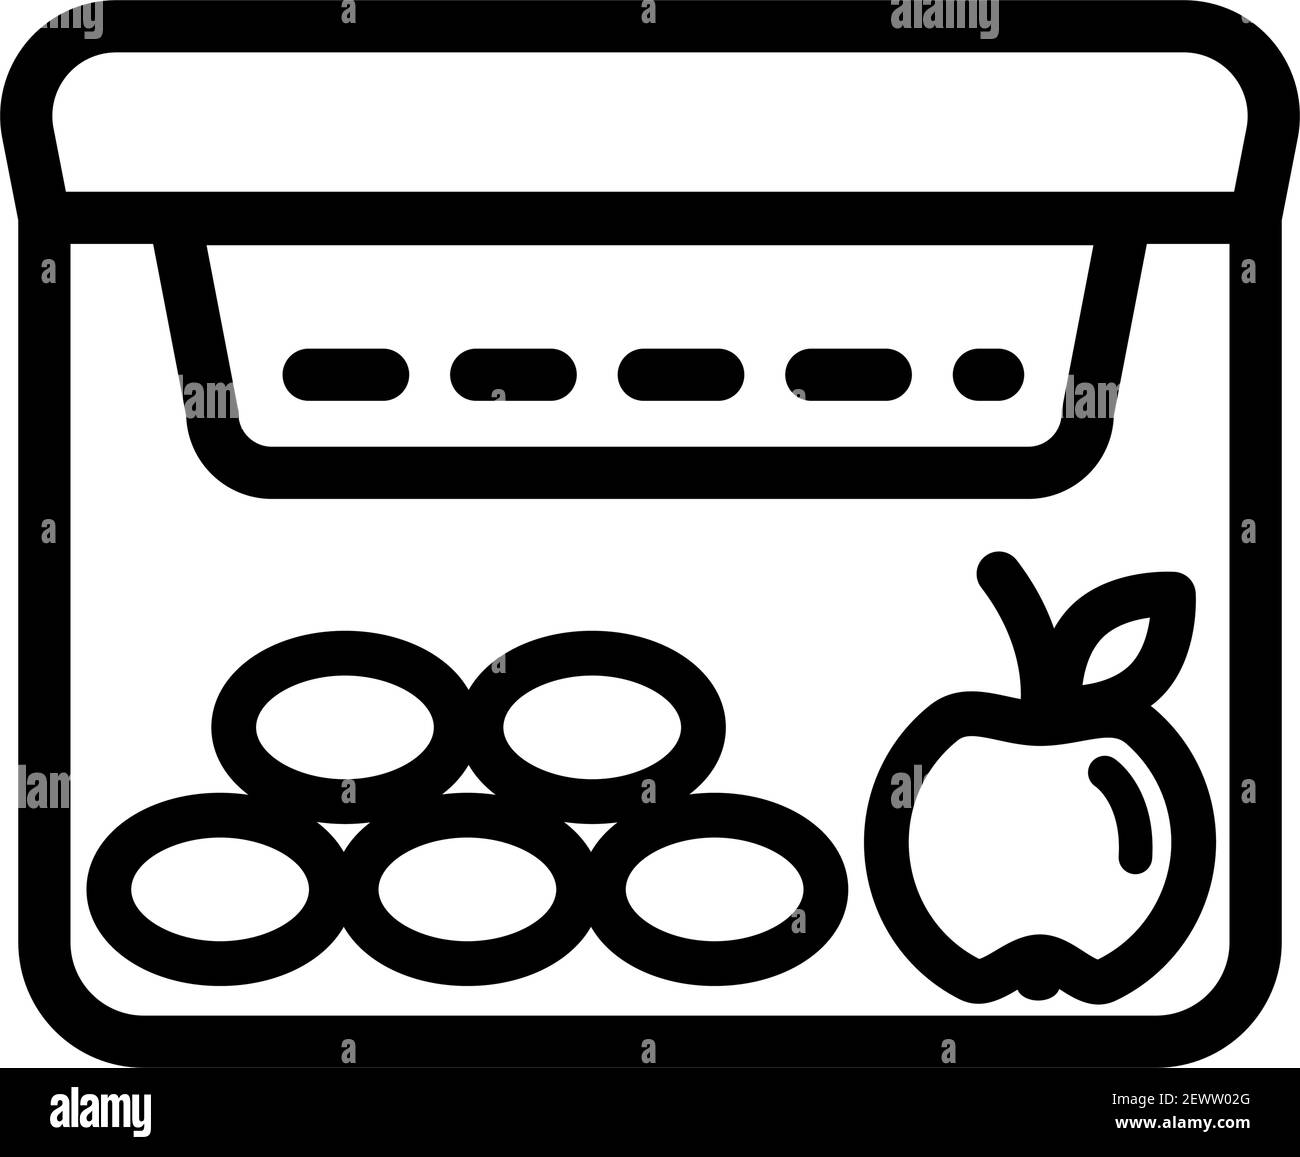 Lunchbox outline simple icon. Illustration of lunchbox icon vector for web design isolated on white Stock Vector